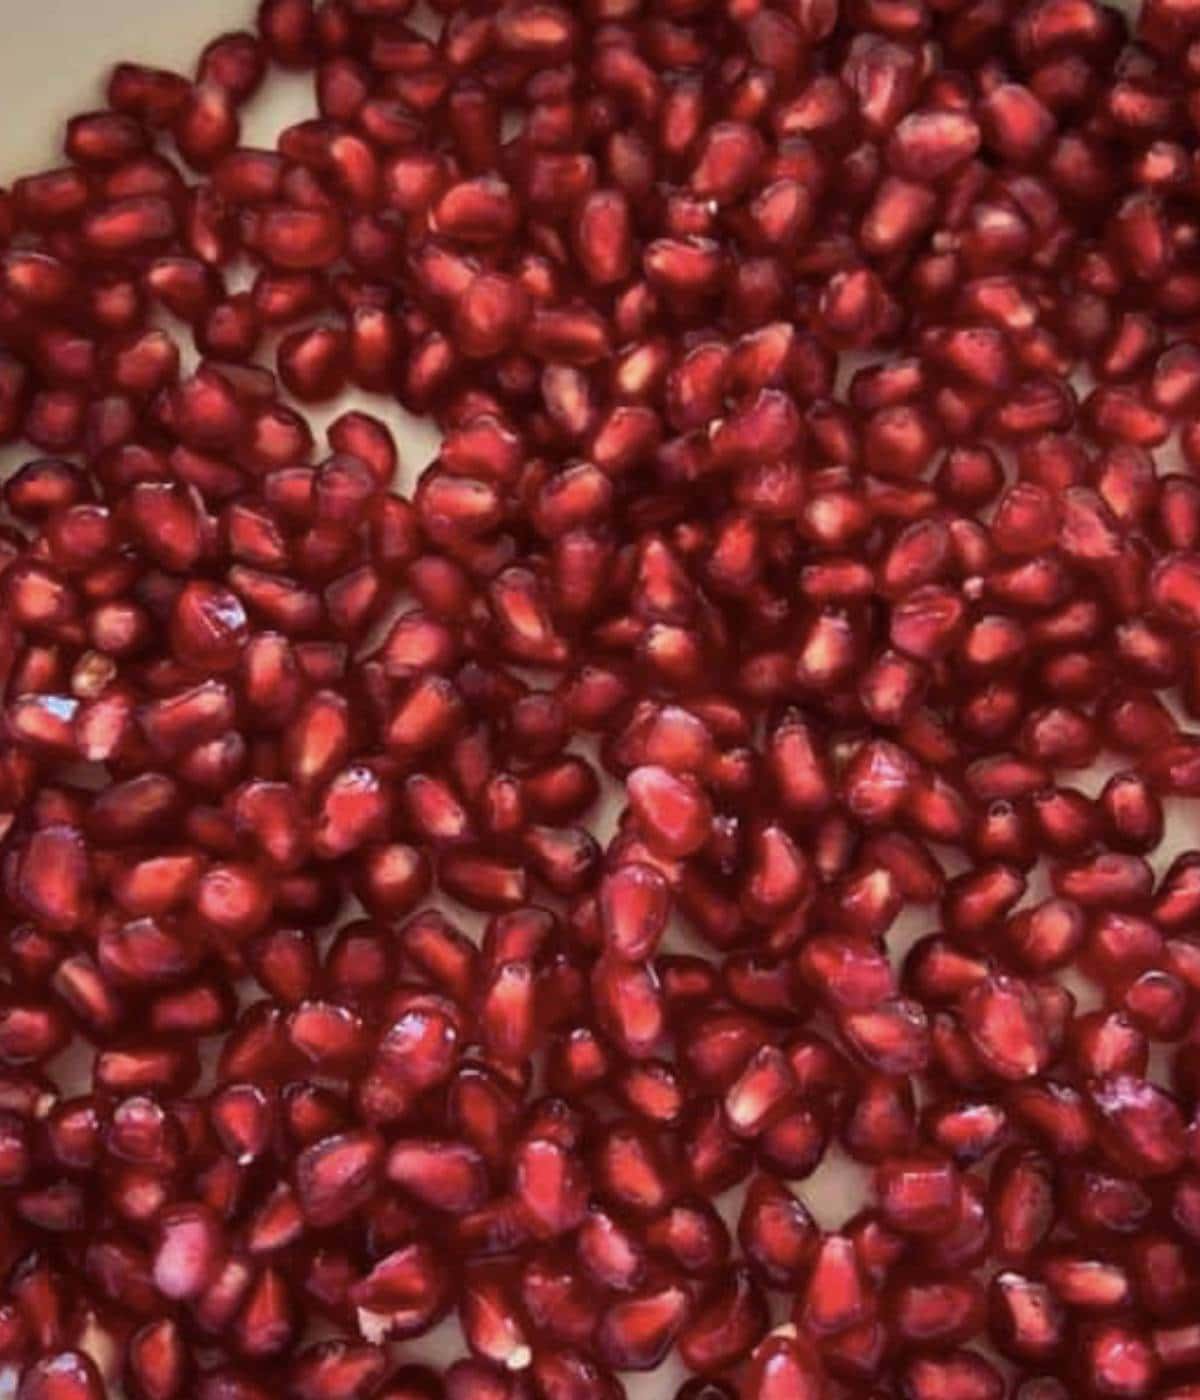 Bowl of pomegranate seeds.